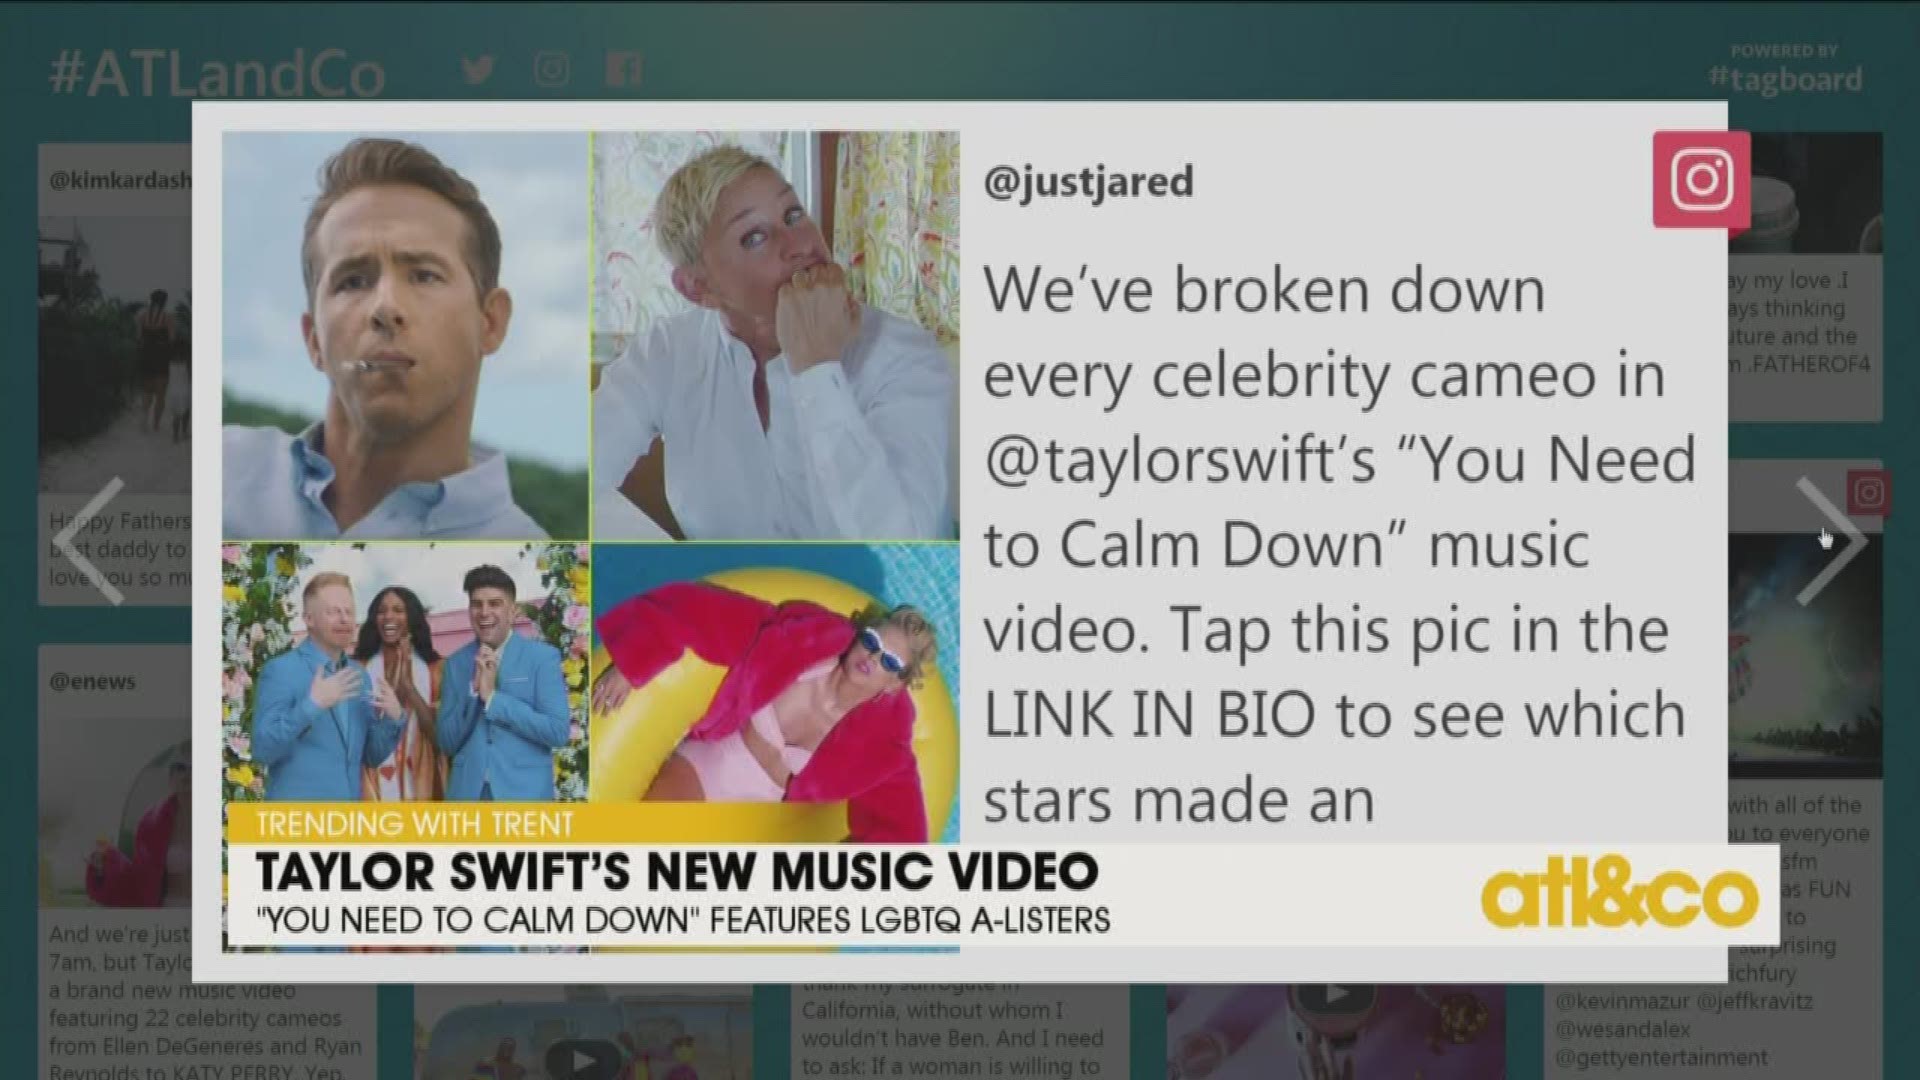 Trending with Trent is excited about T-Swift's new pride-filled music video for "You Need to Calm Down!"